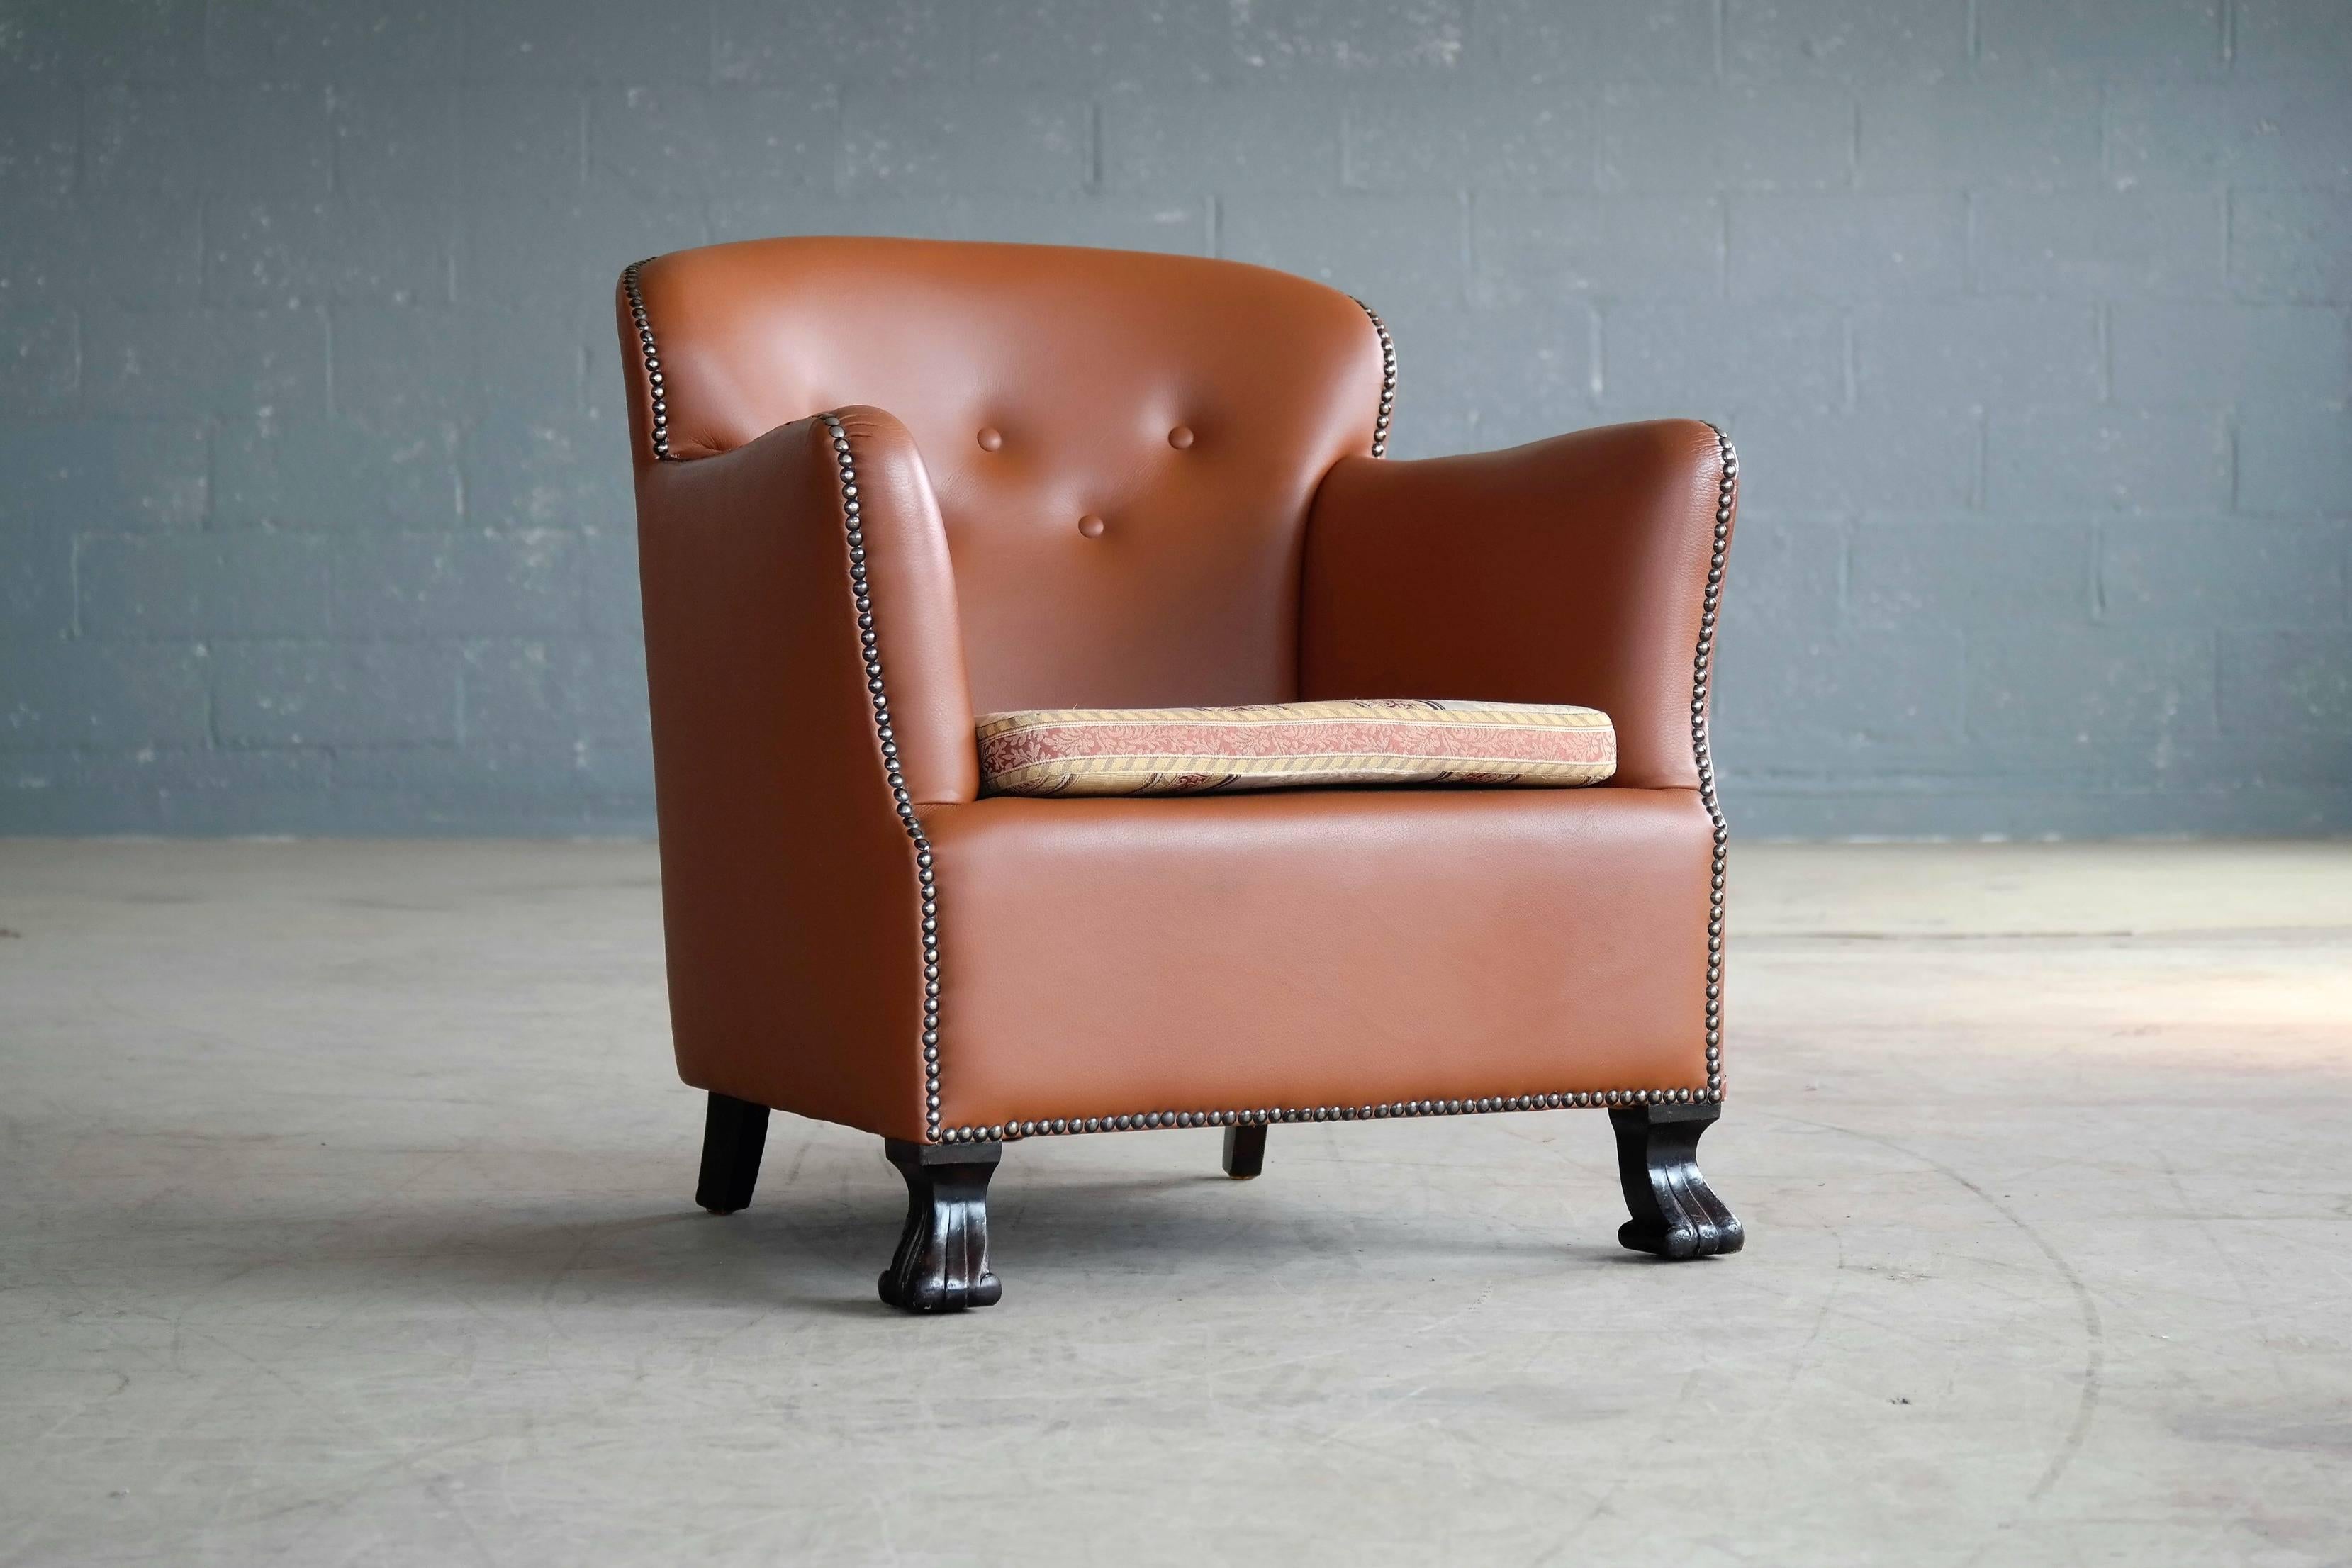 Scandinavian Modern Danish, 1930s Half Size Club Chair in New Cognac Colored Leather and Brass Tacks